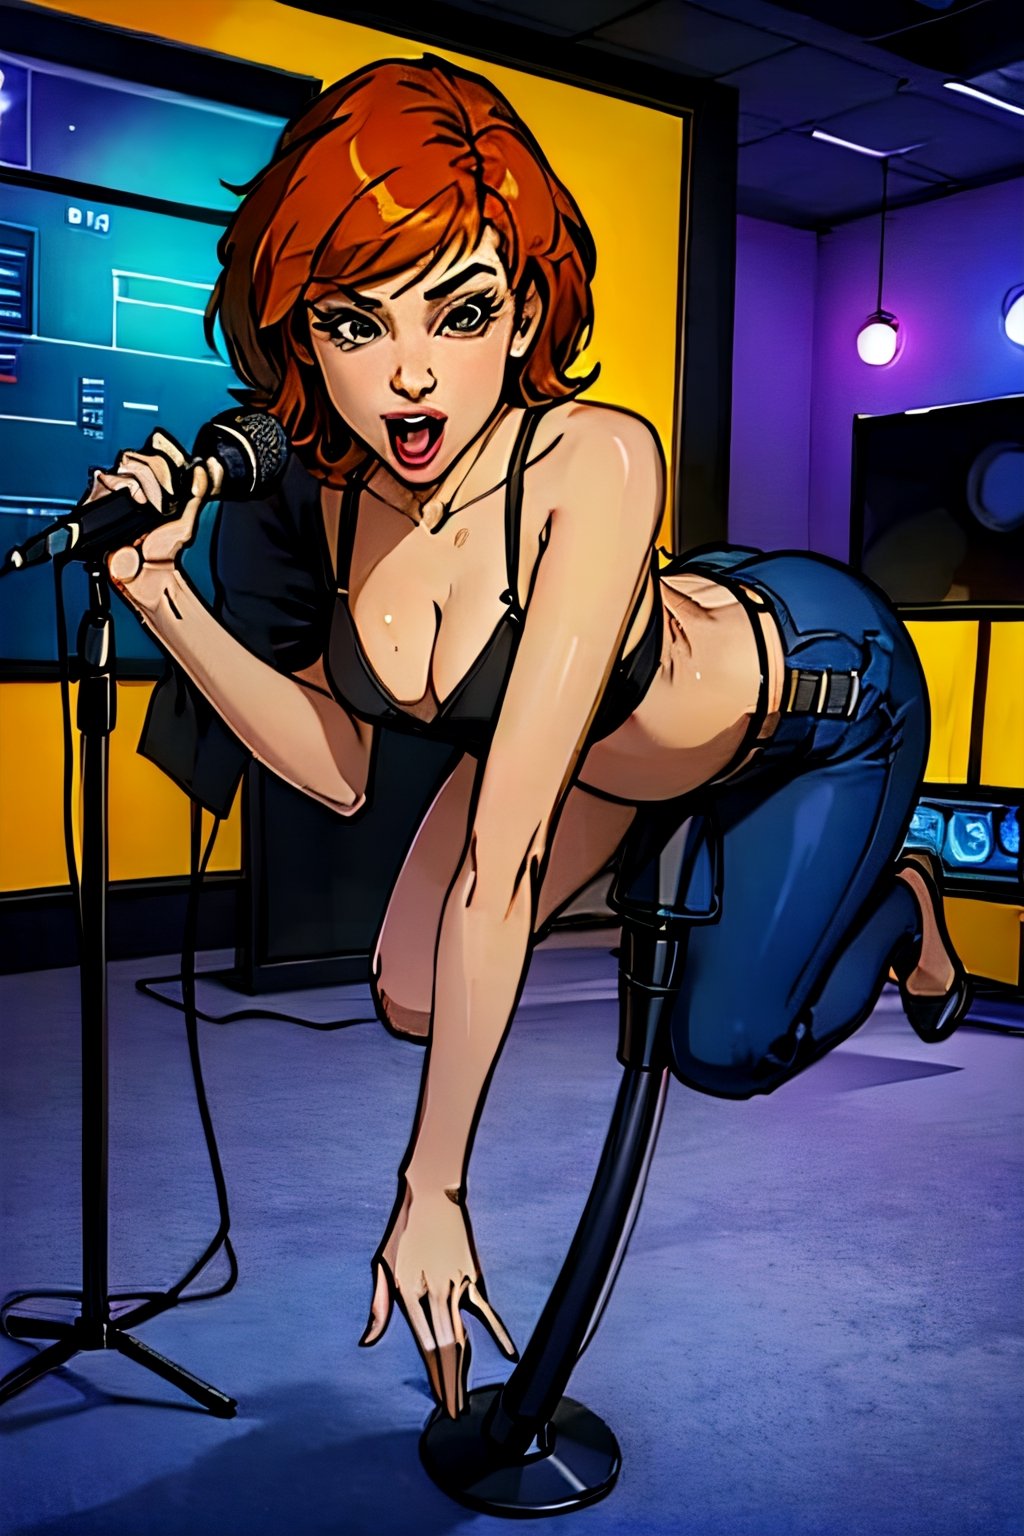 april o'neil, facial portrait, sexy stare, full body, sexy  pose, inside newsroom, cameras, teleprompter, microphone, screaming 